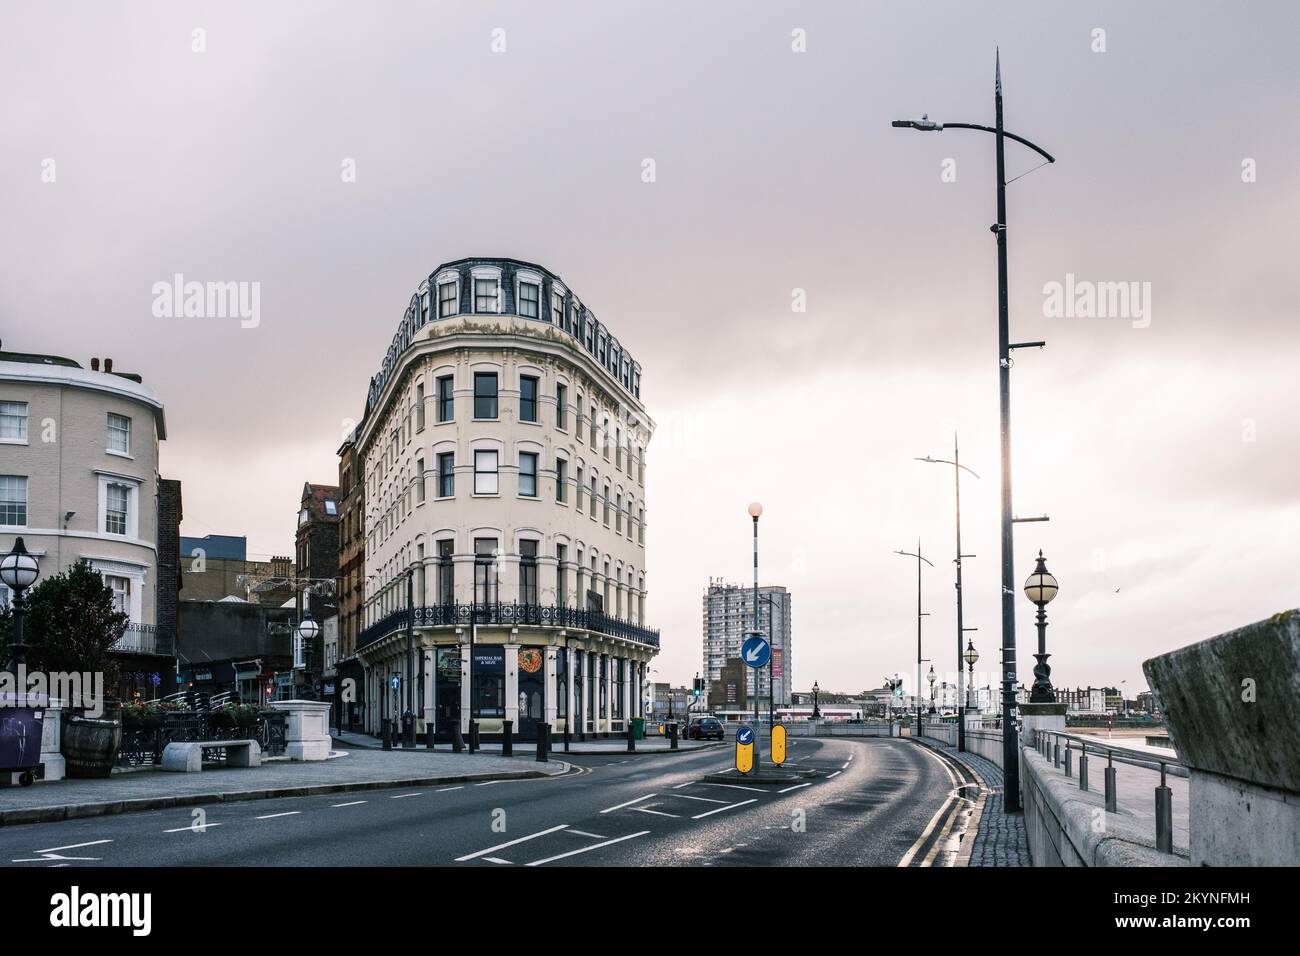 The Imperial Building or Hotel, 2-14 High Street, Margate, Kent, UK. Built in 1880 - Flatiron Style Building. Stock Photo